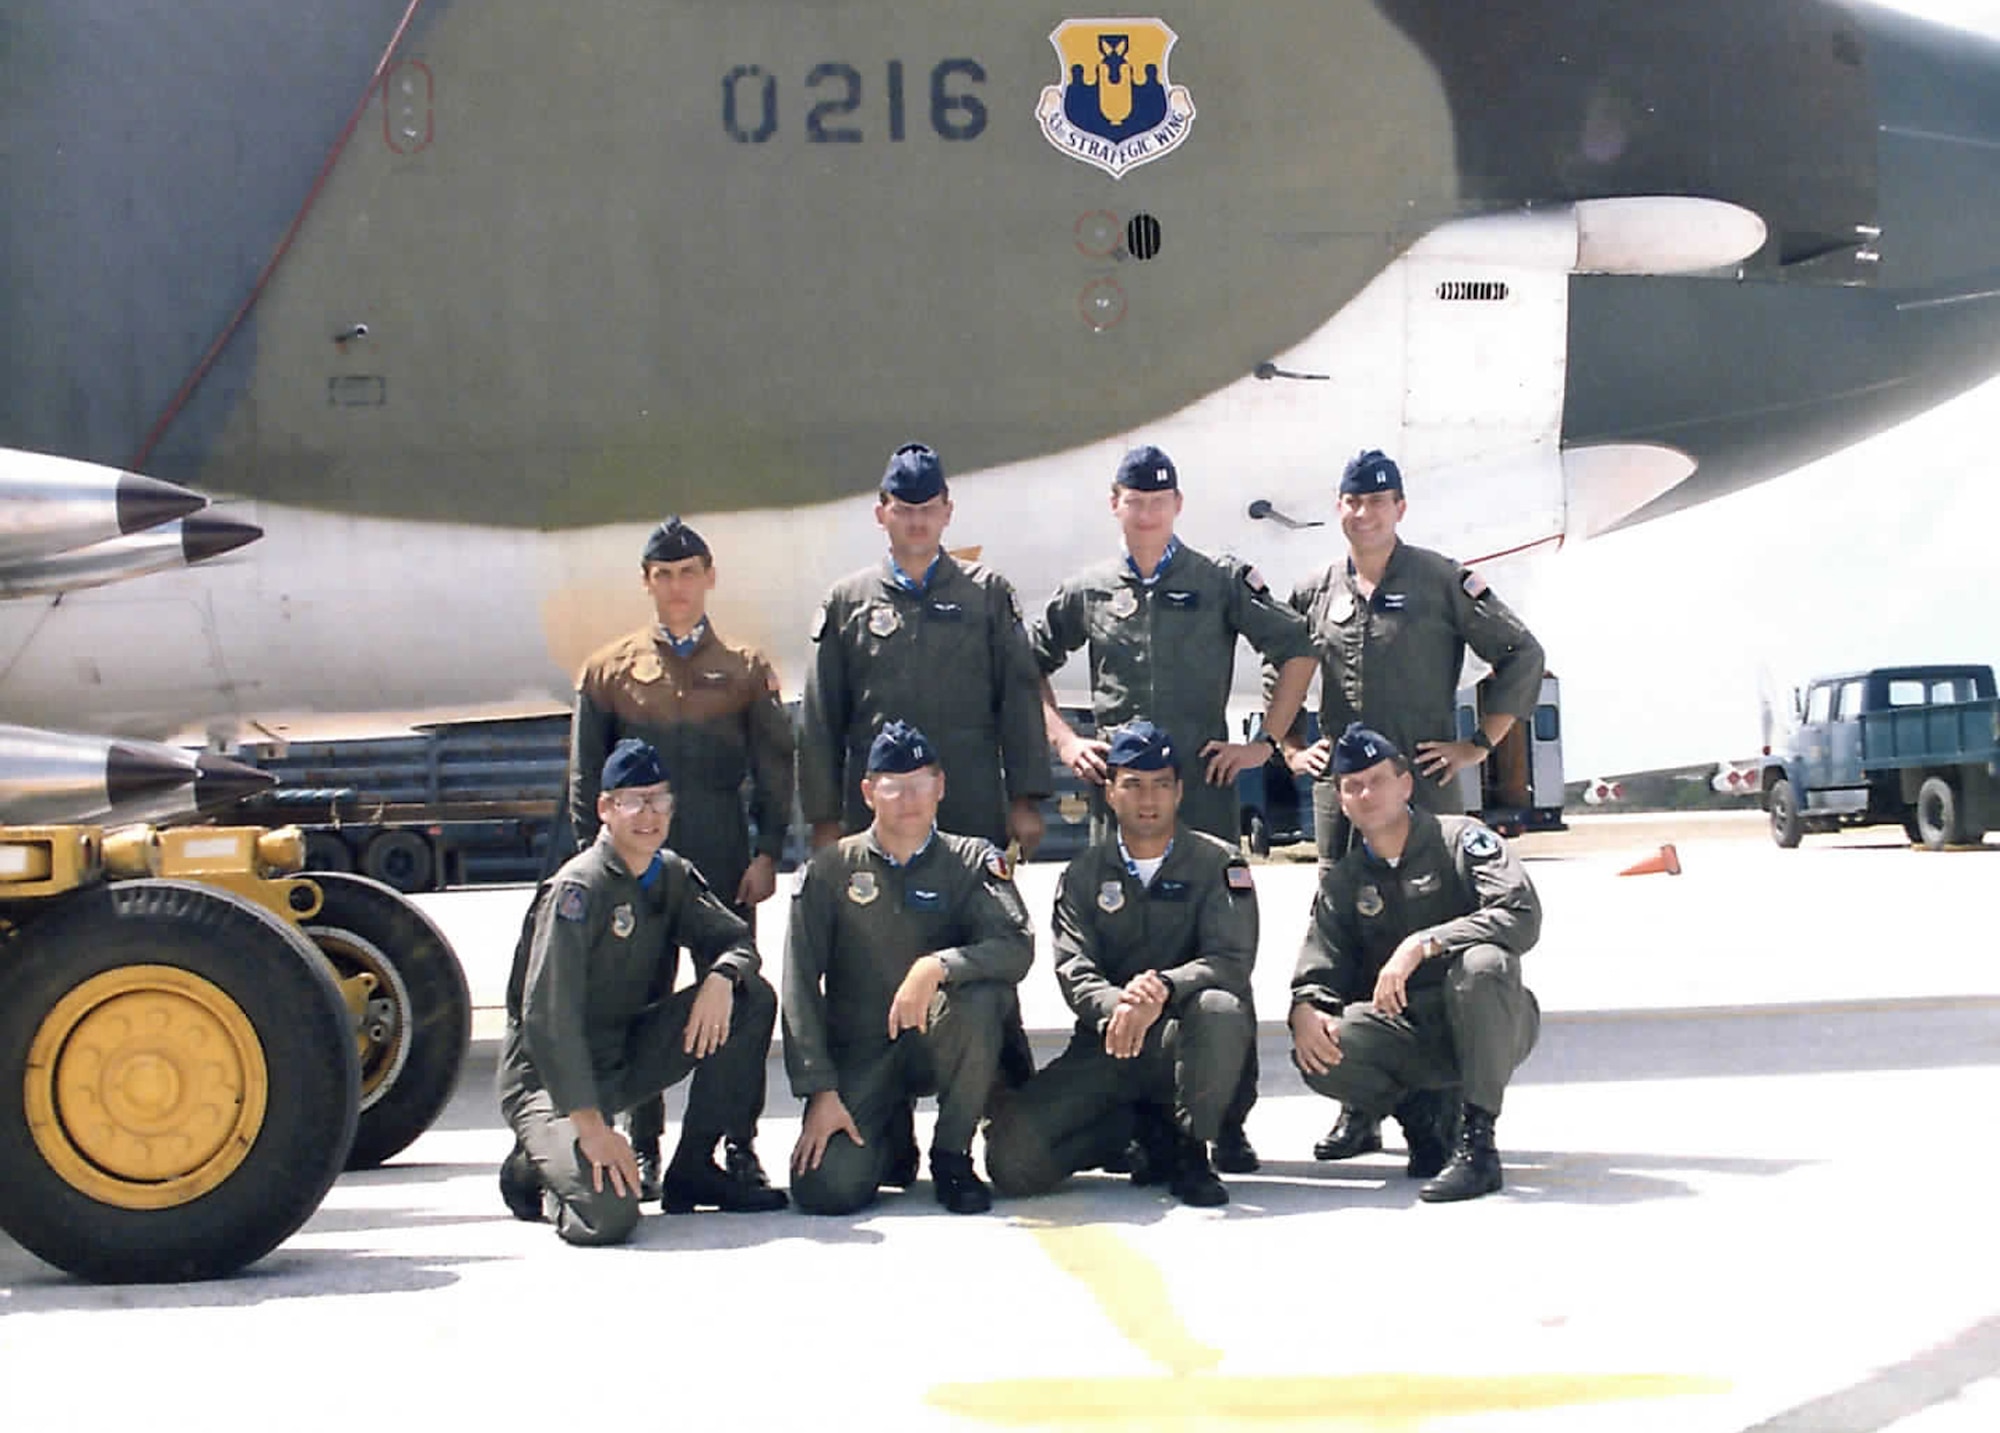 BARKSDALE AIR FORCE BASE, La. -- Lieutenant Welch's father, retired Lt. Col. Don Welch (bottom right), poses with the crew of his B-52D in 1985. First Lt. Daniel Welch has some big shoes to fill; four of them to be exact. Lieutenant Welch, a pilot with the 11th Bomb Squadron, will become the third consecutive generation of B-52 flight officers in his family. (courtesy photo)